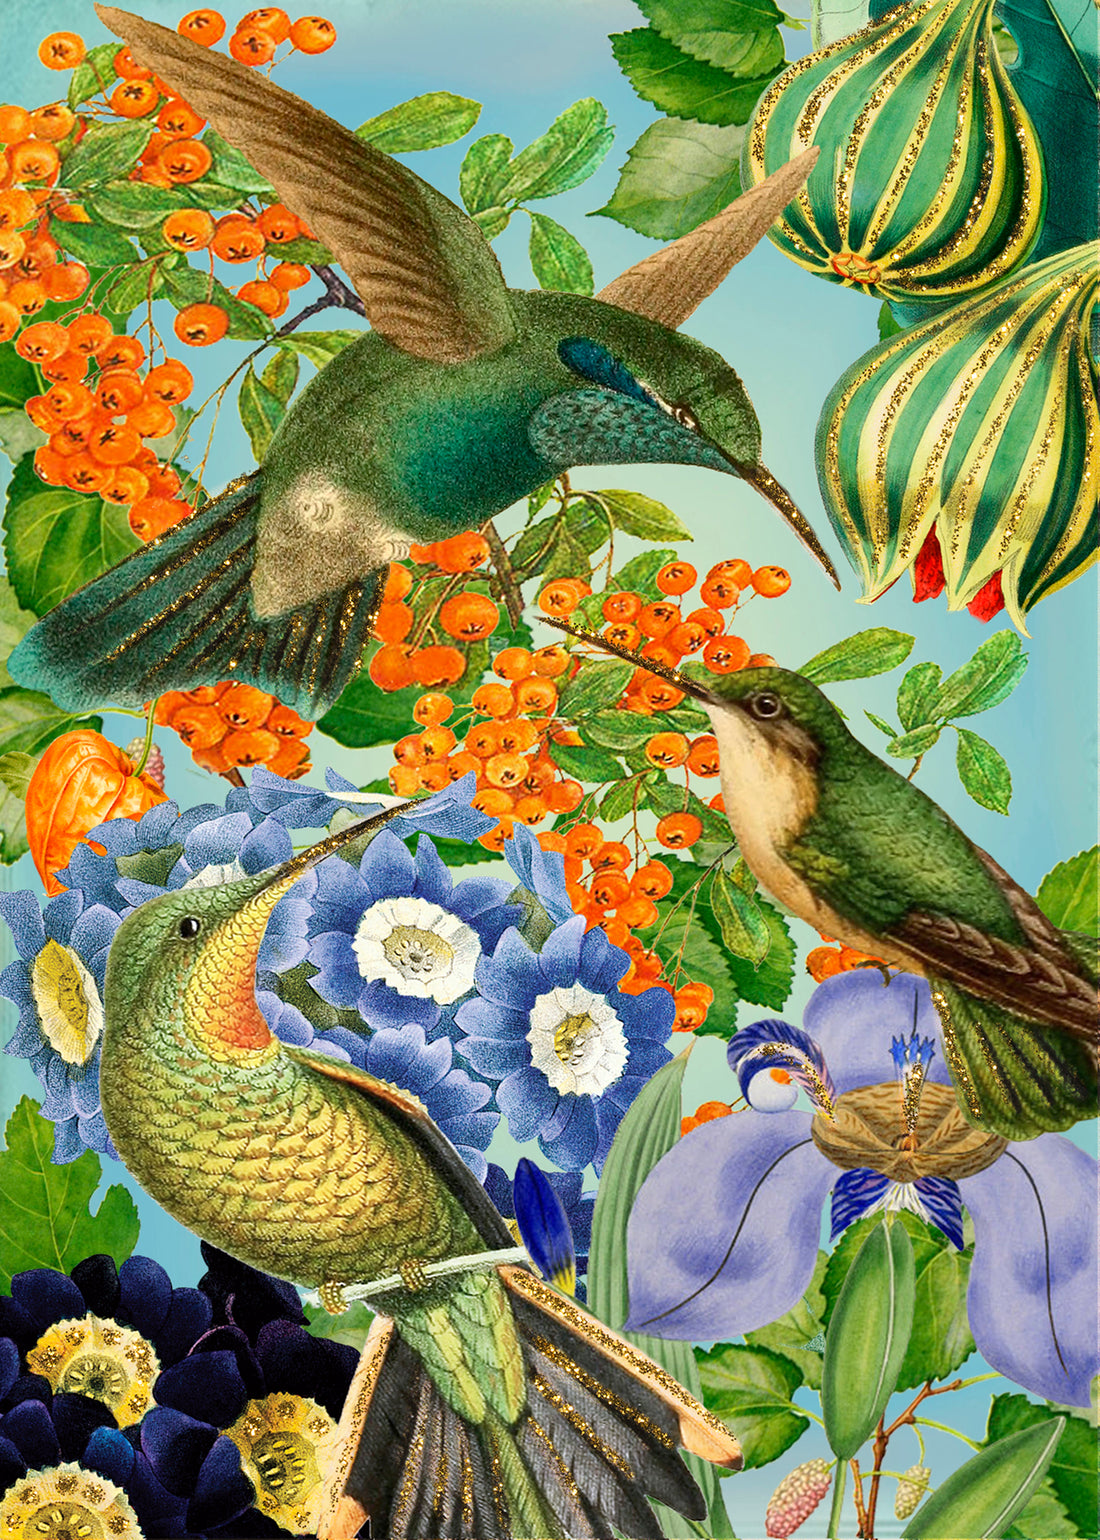 Refined luxury Hummingbirds Glittered Greeting Card featuring a colorful illustration of hummingbirds and exotic flowers with hand-glittered design by Madame Treacle.